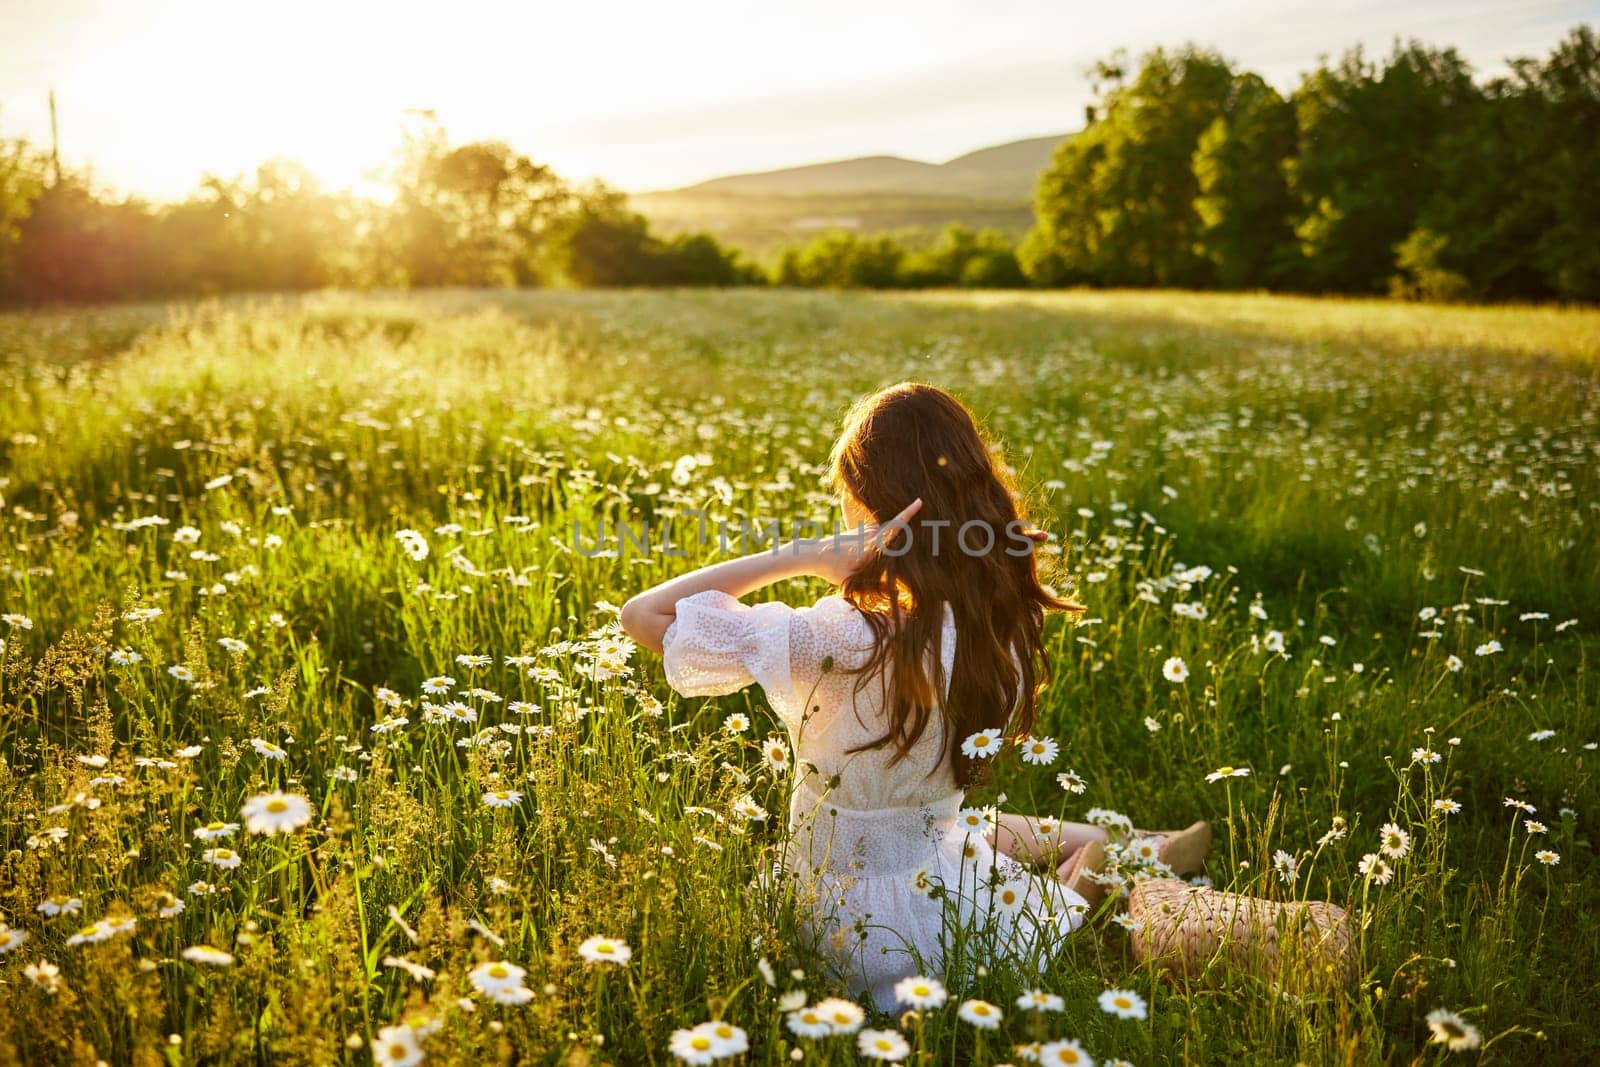 a red-haired woman in a light dress sits in a chamomile field at sunset and admires the passing day by Vichizh